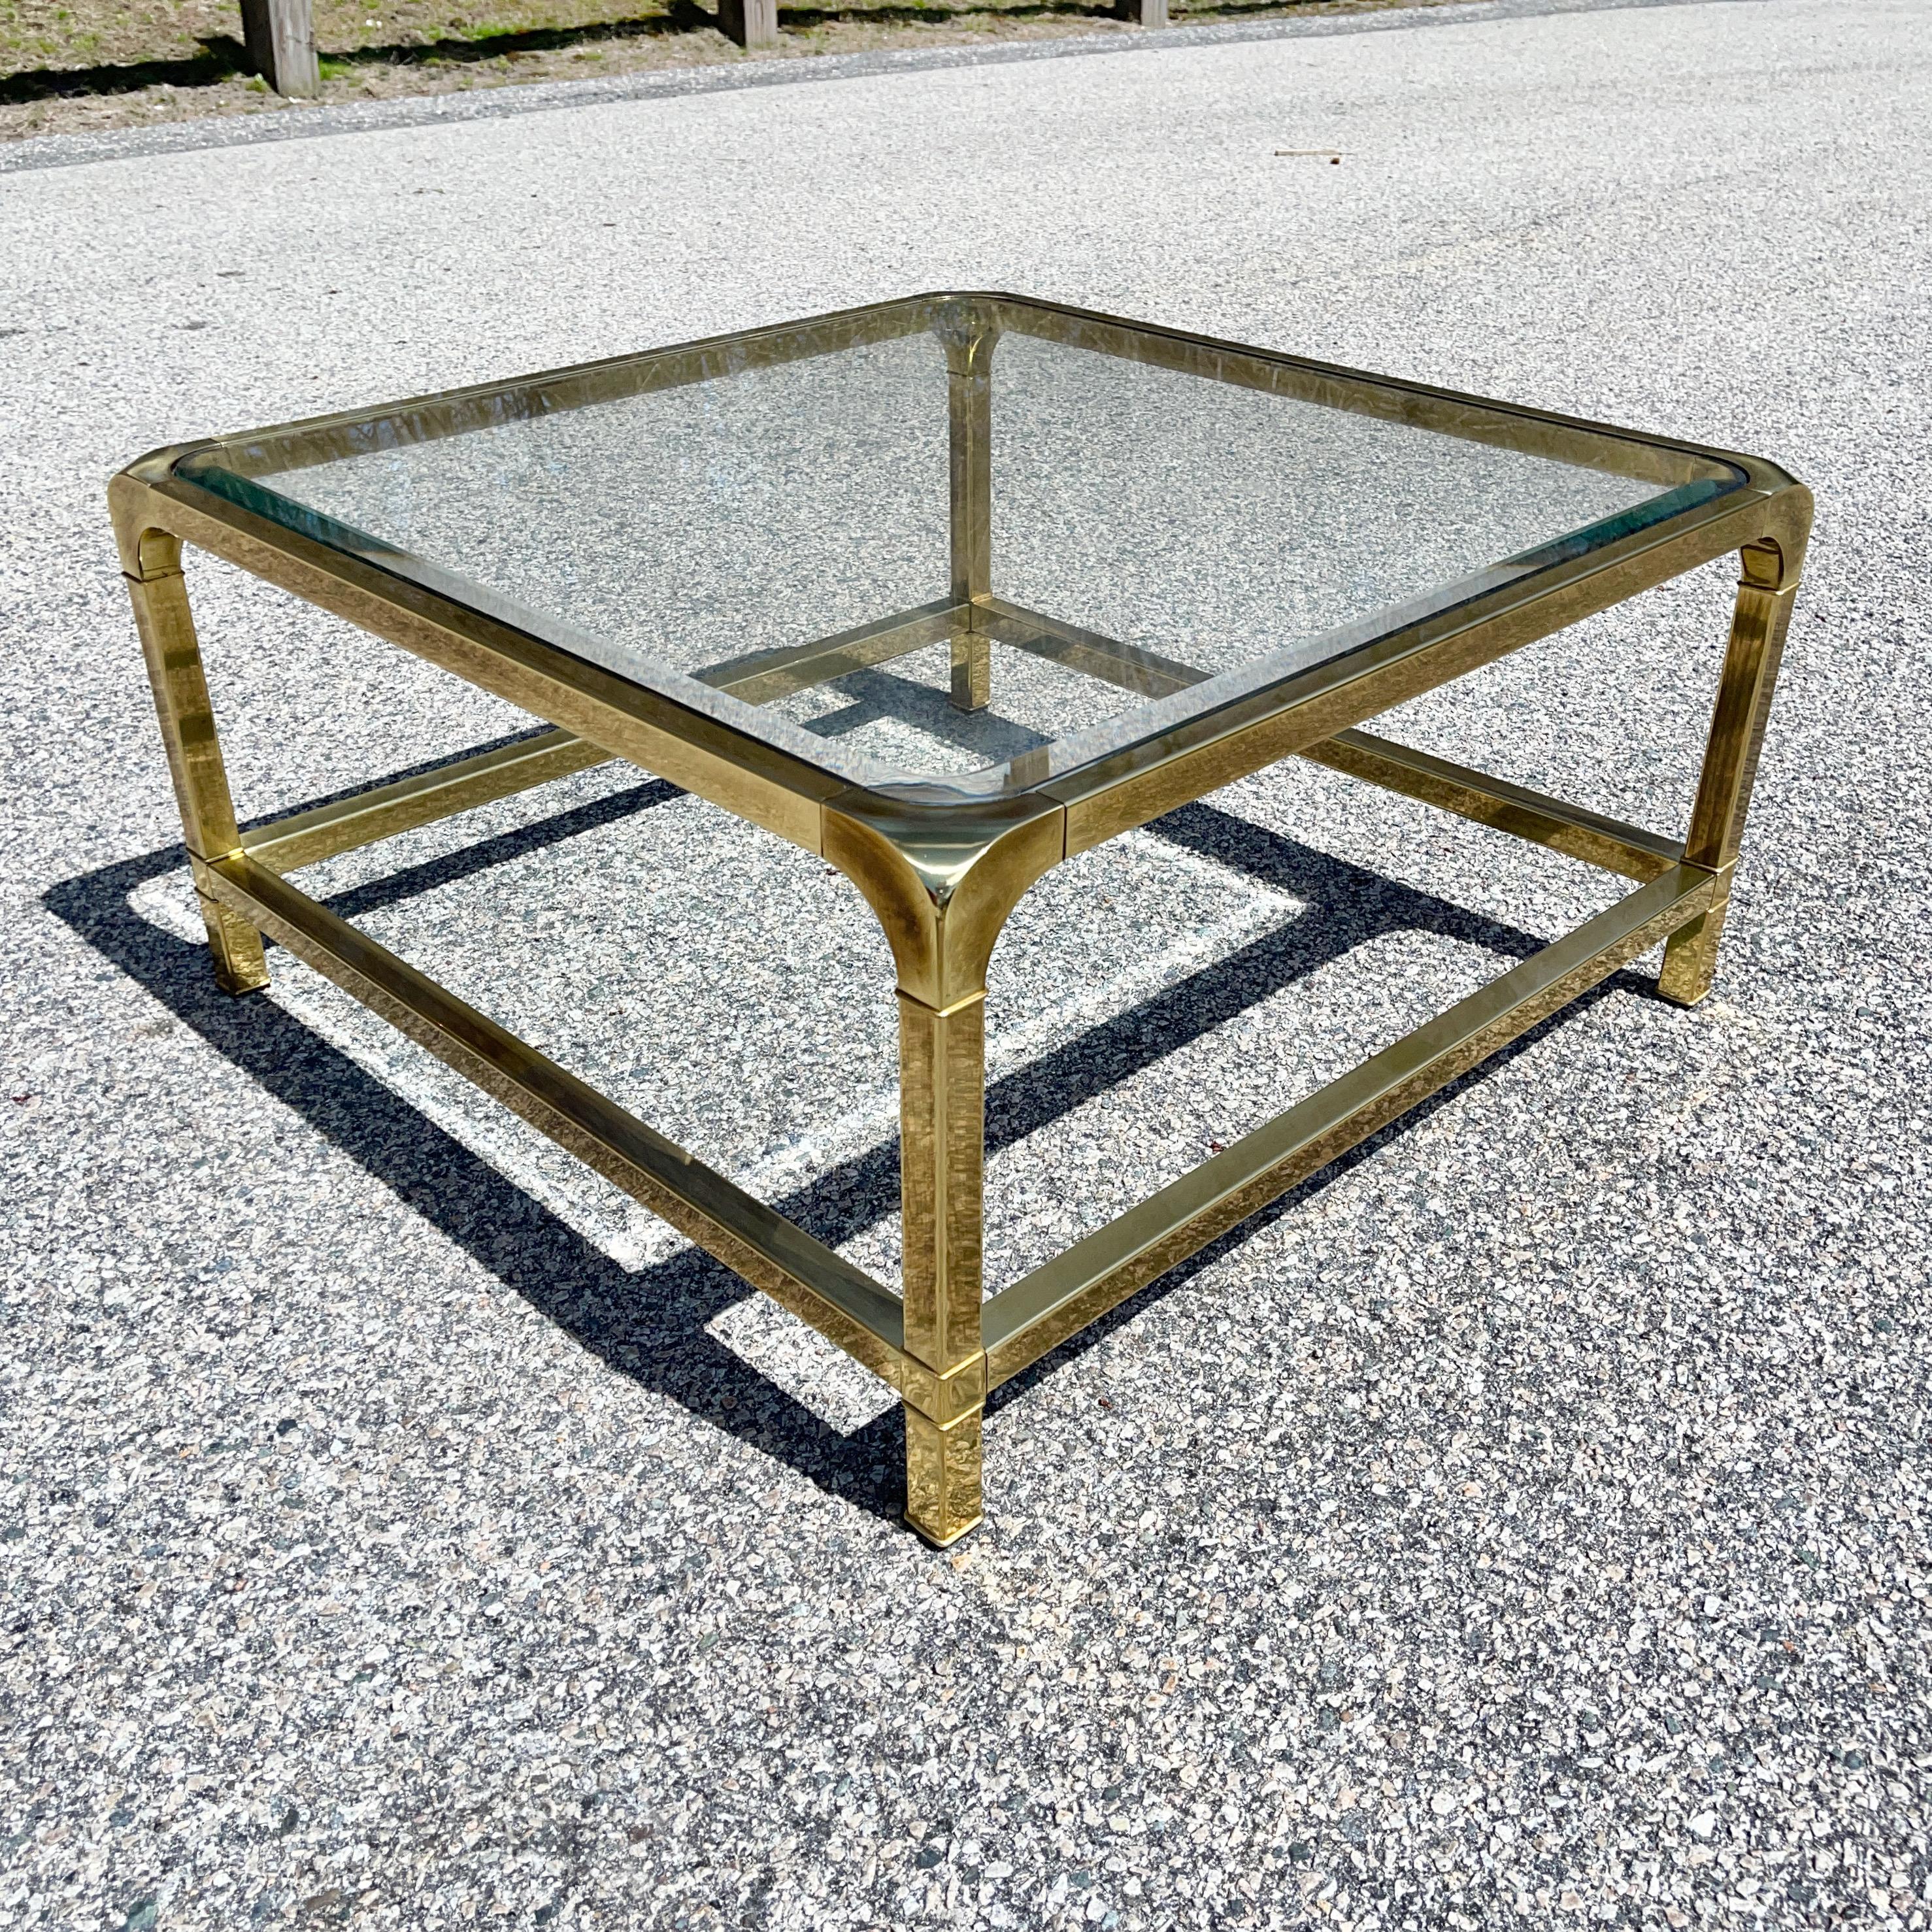 Mastercraft Furniture Co. model 1310 square brass frame cocktail table with inset clear glass top designed by William Doezema early 1970's.

    